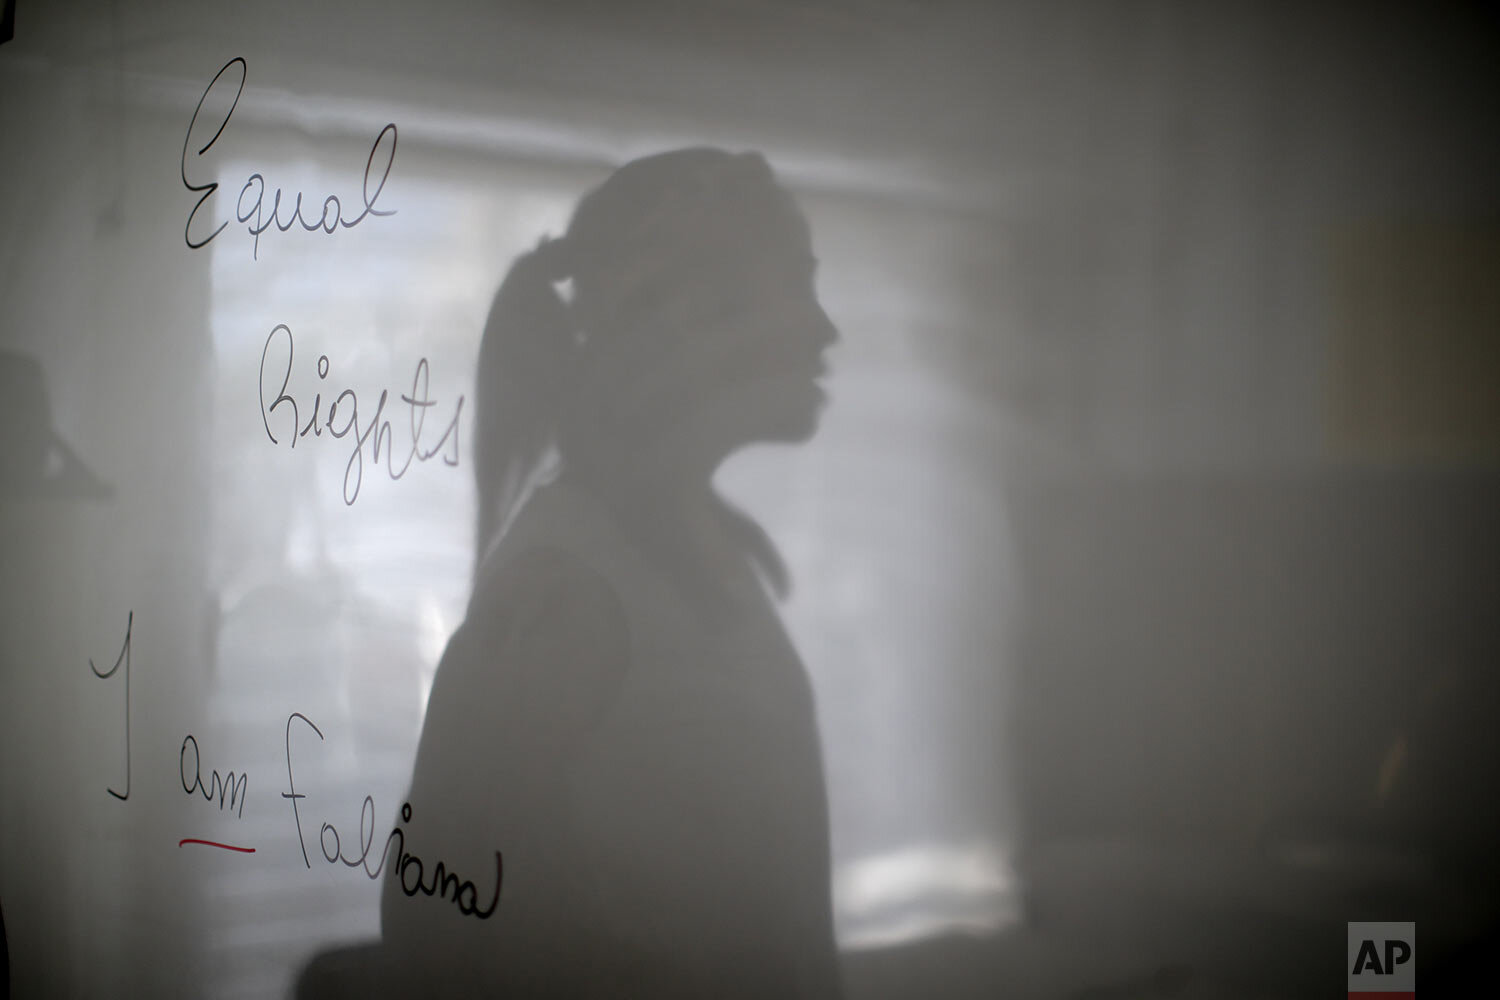  Transgender woman Fabiana Rodríguez, an English teacher, poses for a portrait with her shadow overlaying the message she wrote on her blackboard: "Equal rights, I am Fabiana" during an interview at the English Institute where she works as a language